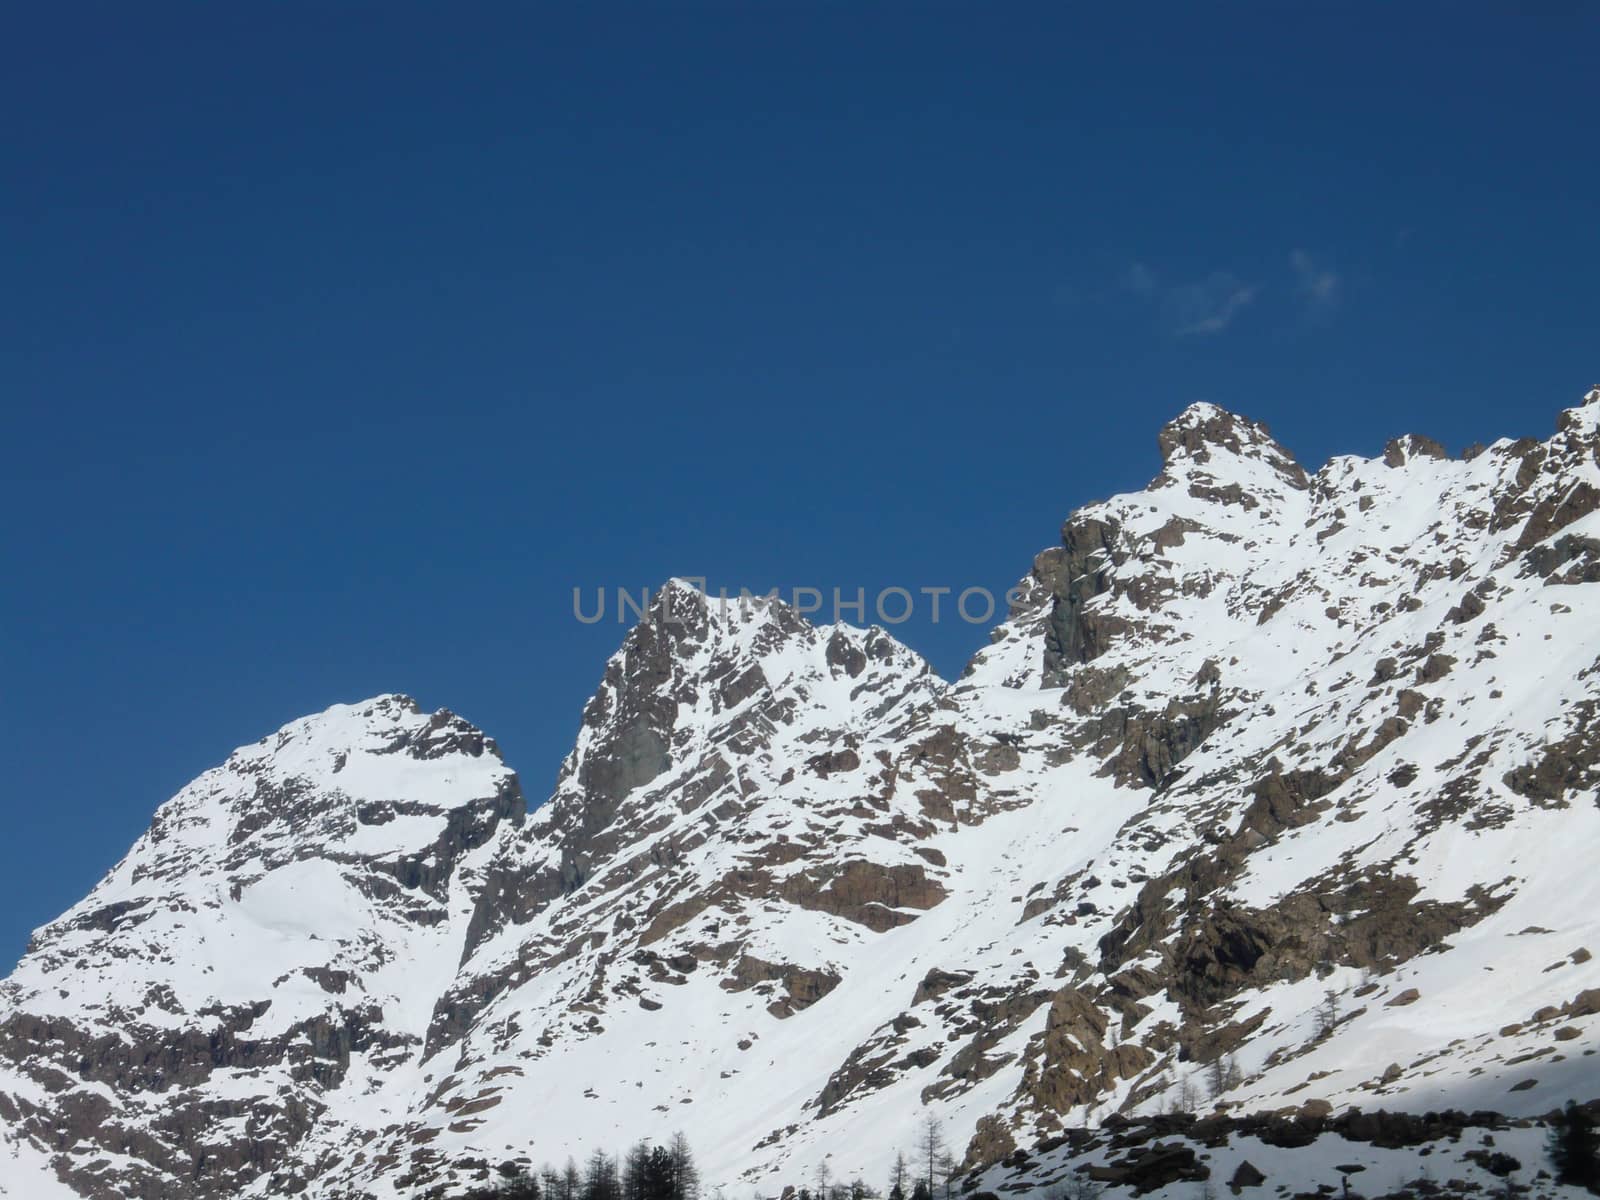 Mountain snowy peaks of the Alps on Spring. Red rocks (iron inside). Hiking, mountain running, mountaineering and other outdoor activities. Corni bruciati, Preda Rossa, Val Masino, Lombardy, Italy